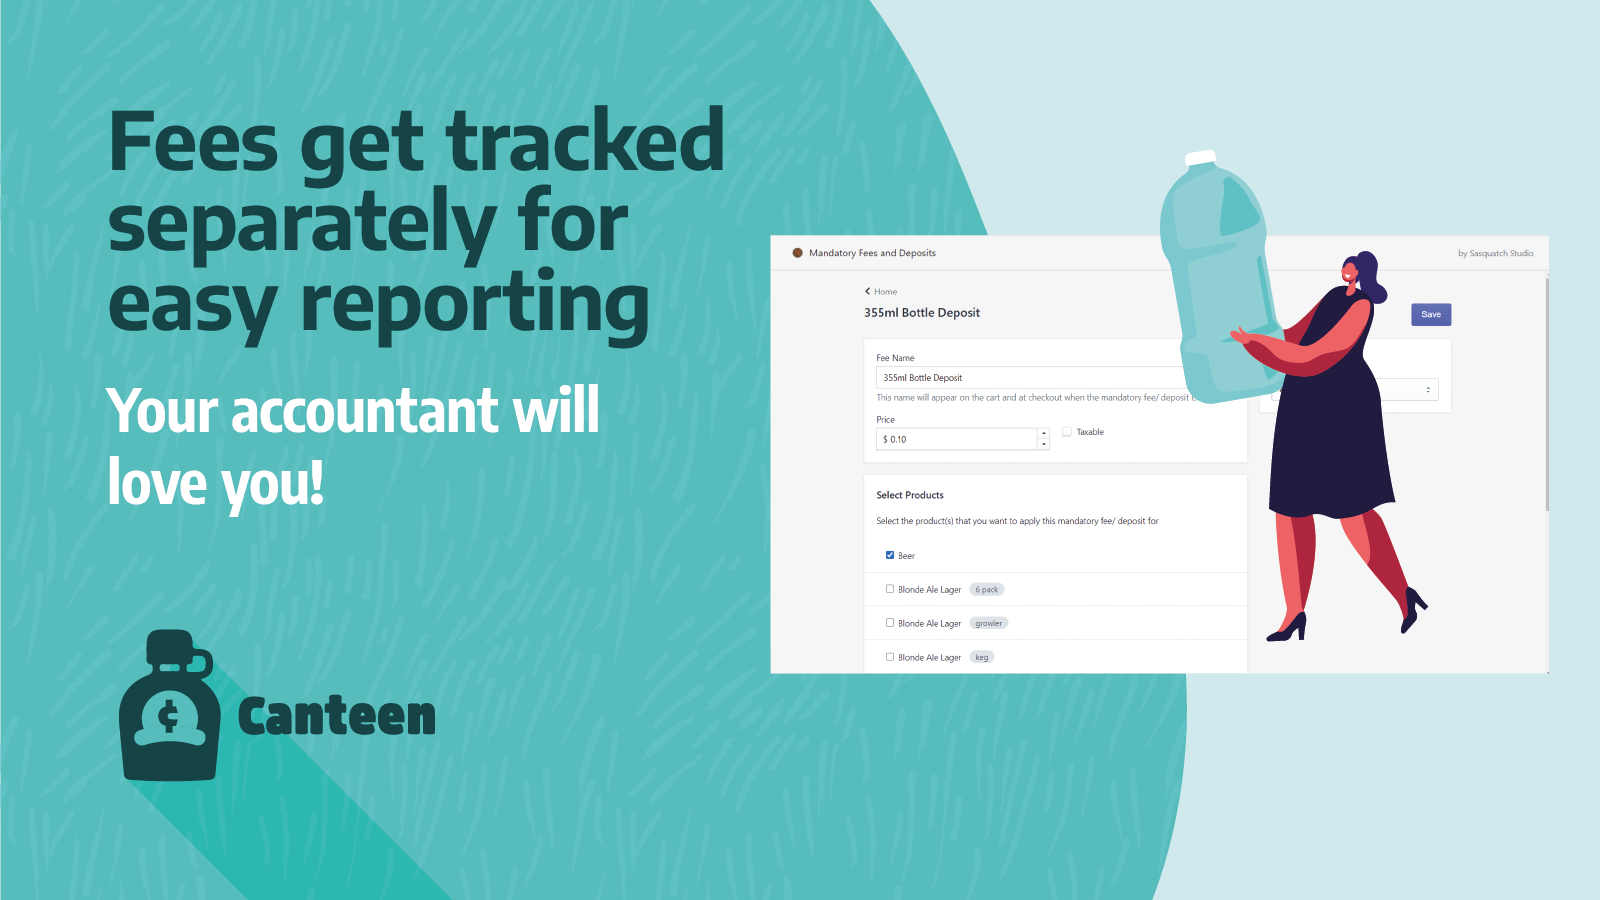 Fees get tracked so you can report easily